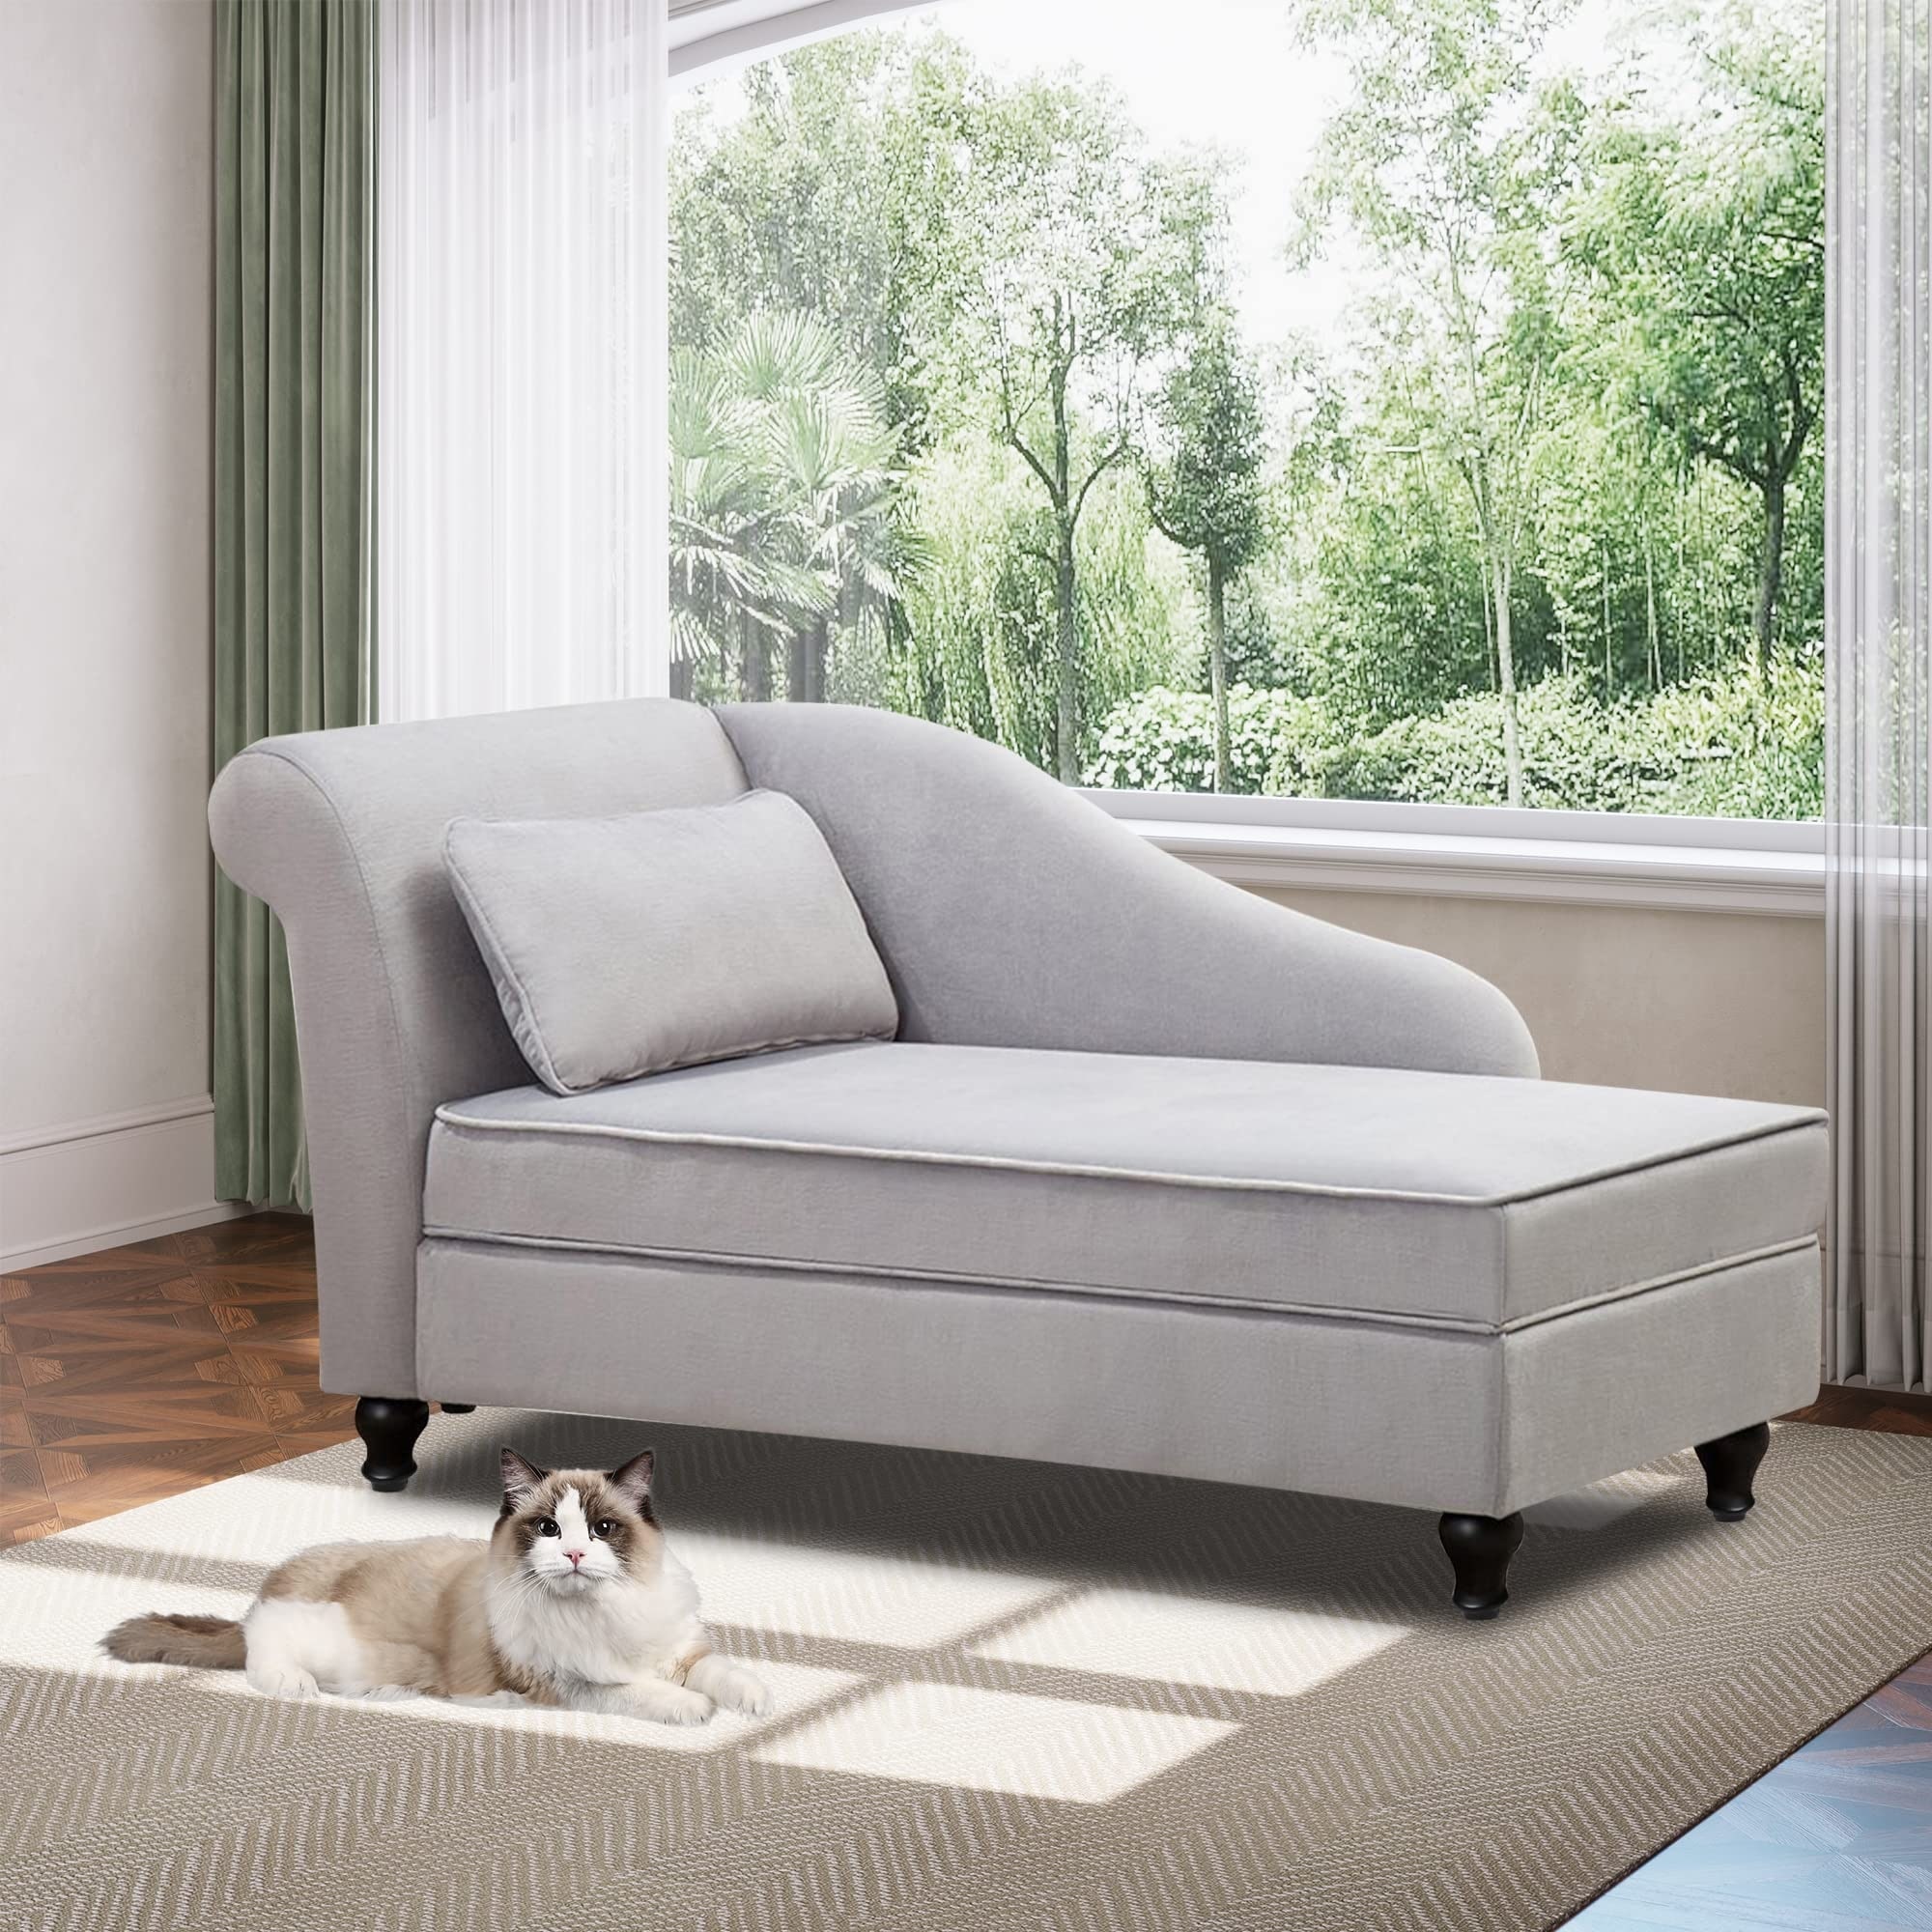 Modern Chaise Lounge Indoor with Storage Fabric Chaise Lounge Couch